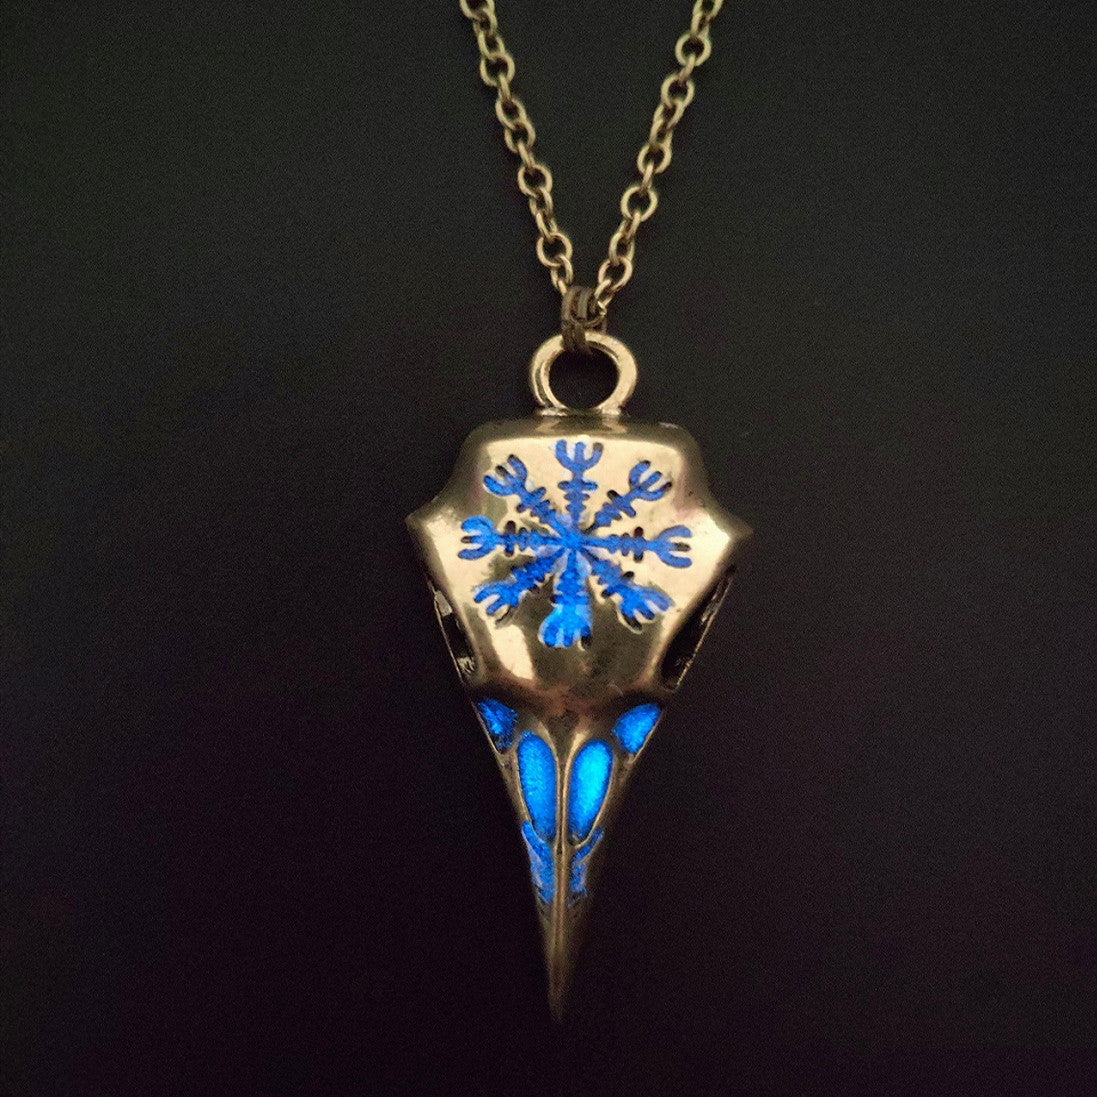 Crow Skull Glowing Necklace